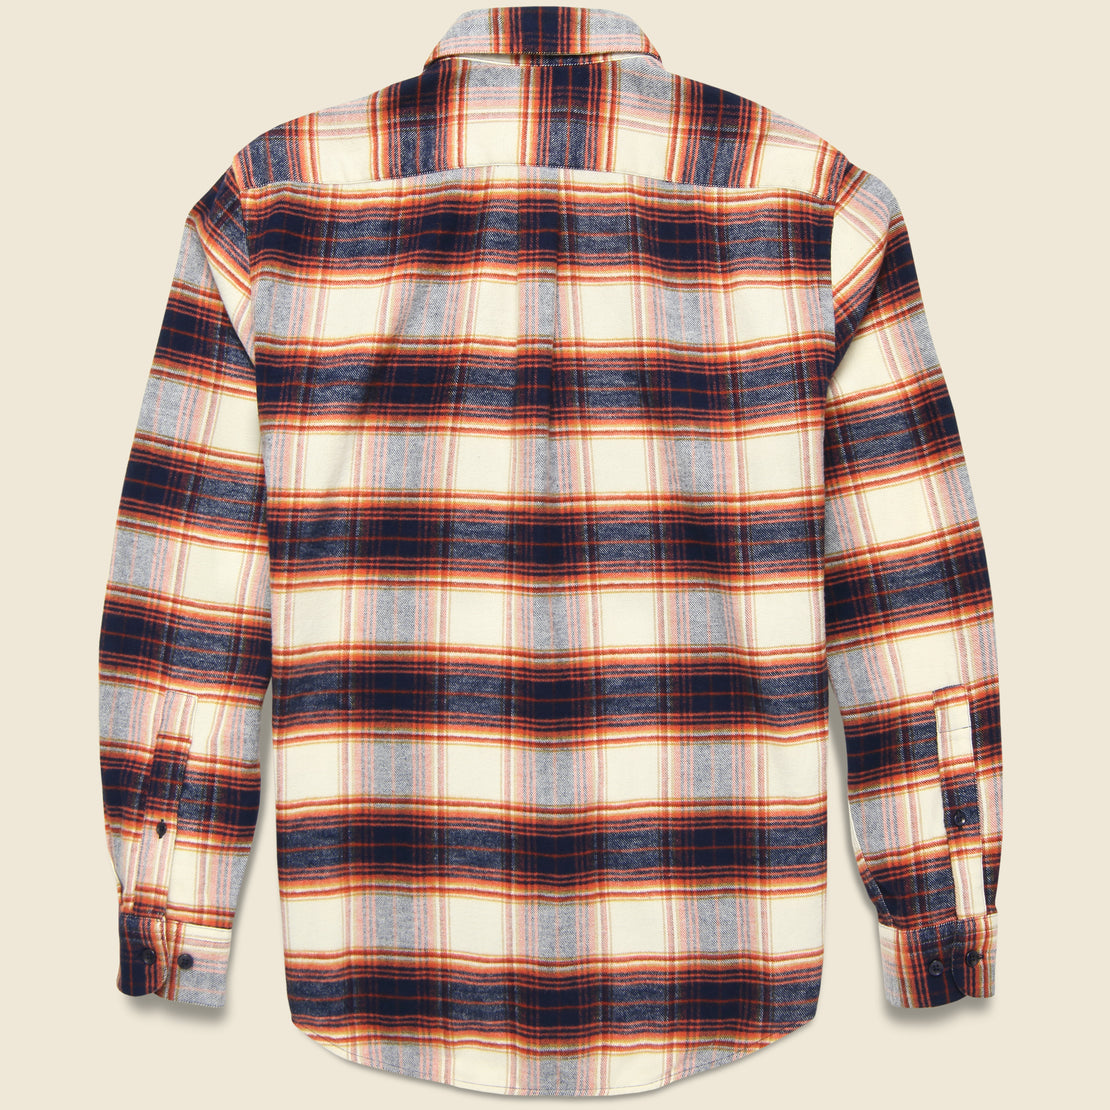 Anonimo Shirt - Cream/Navy - Portuguese Flannel - STAG Provisions - Tops - L/S Woven - Plaid